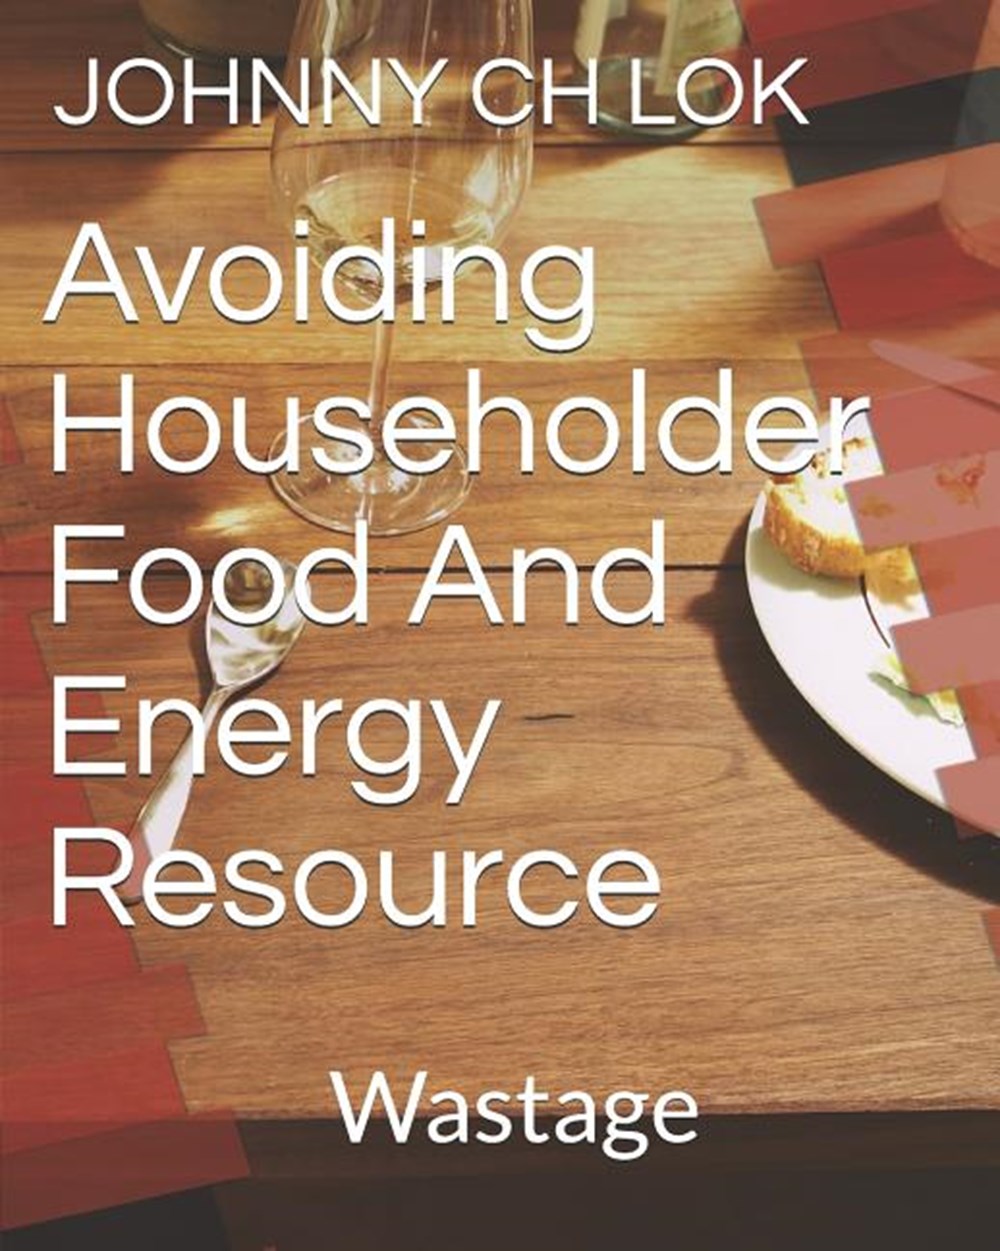 Avoiding Householder Food and Energy Resource Wastage